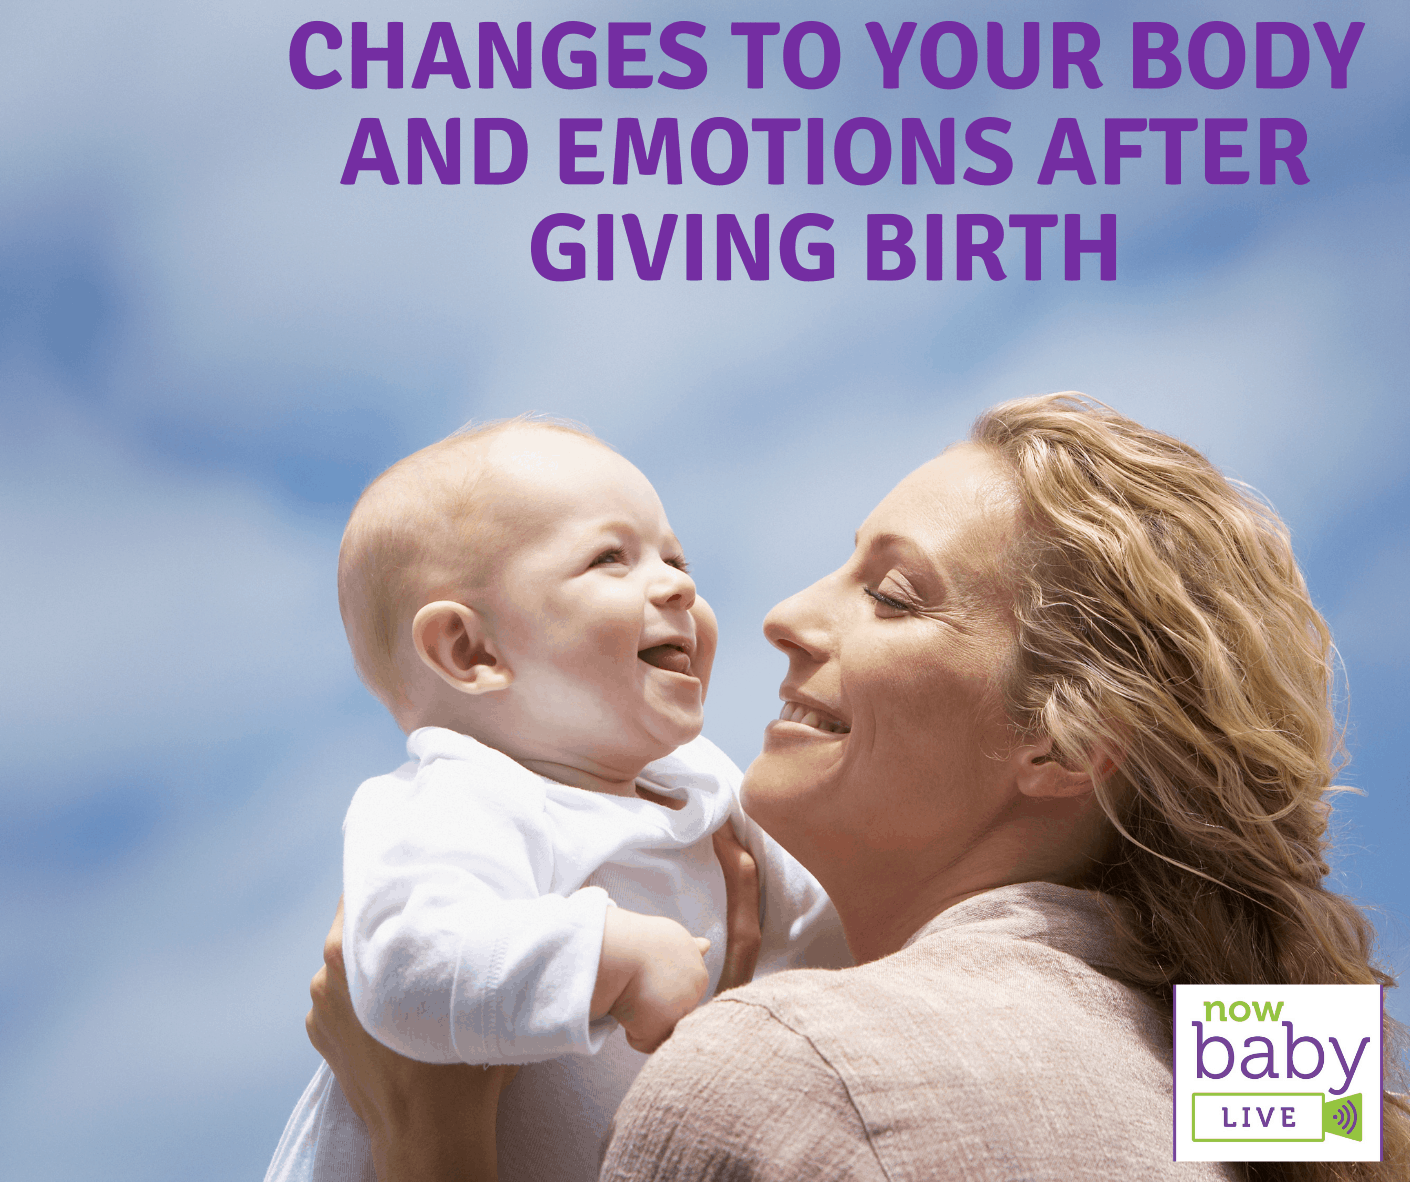 Changes to your body and emotions after giving birth